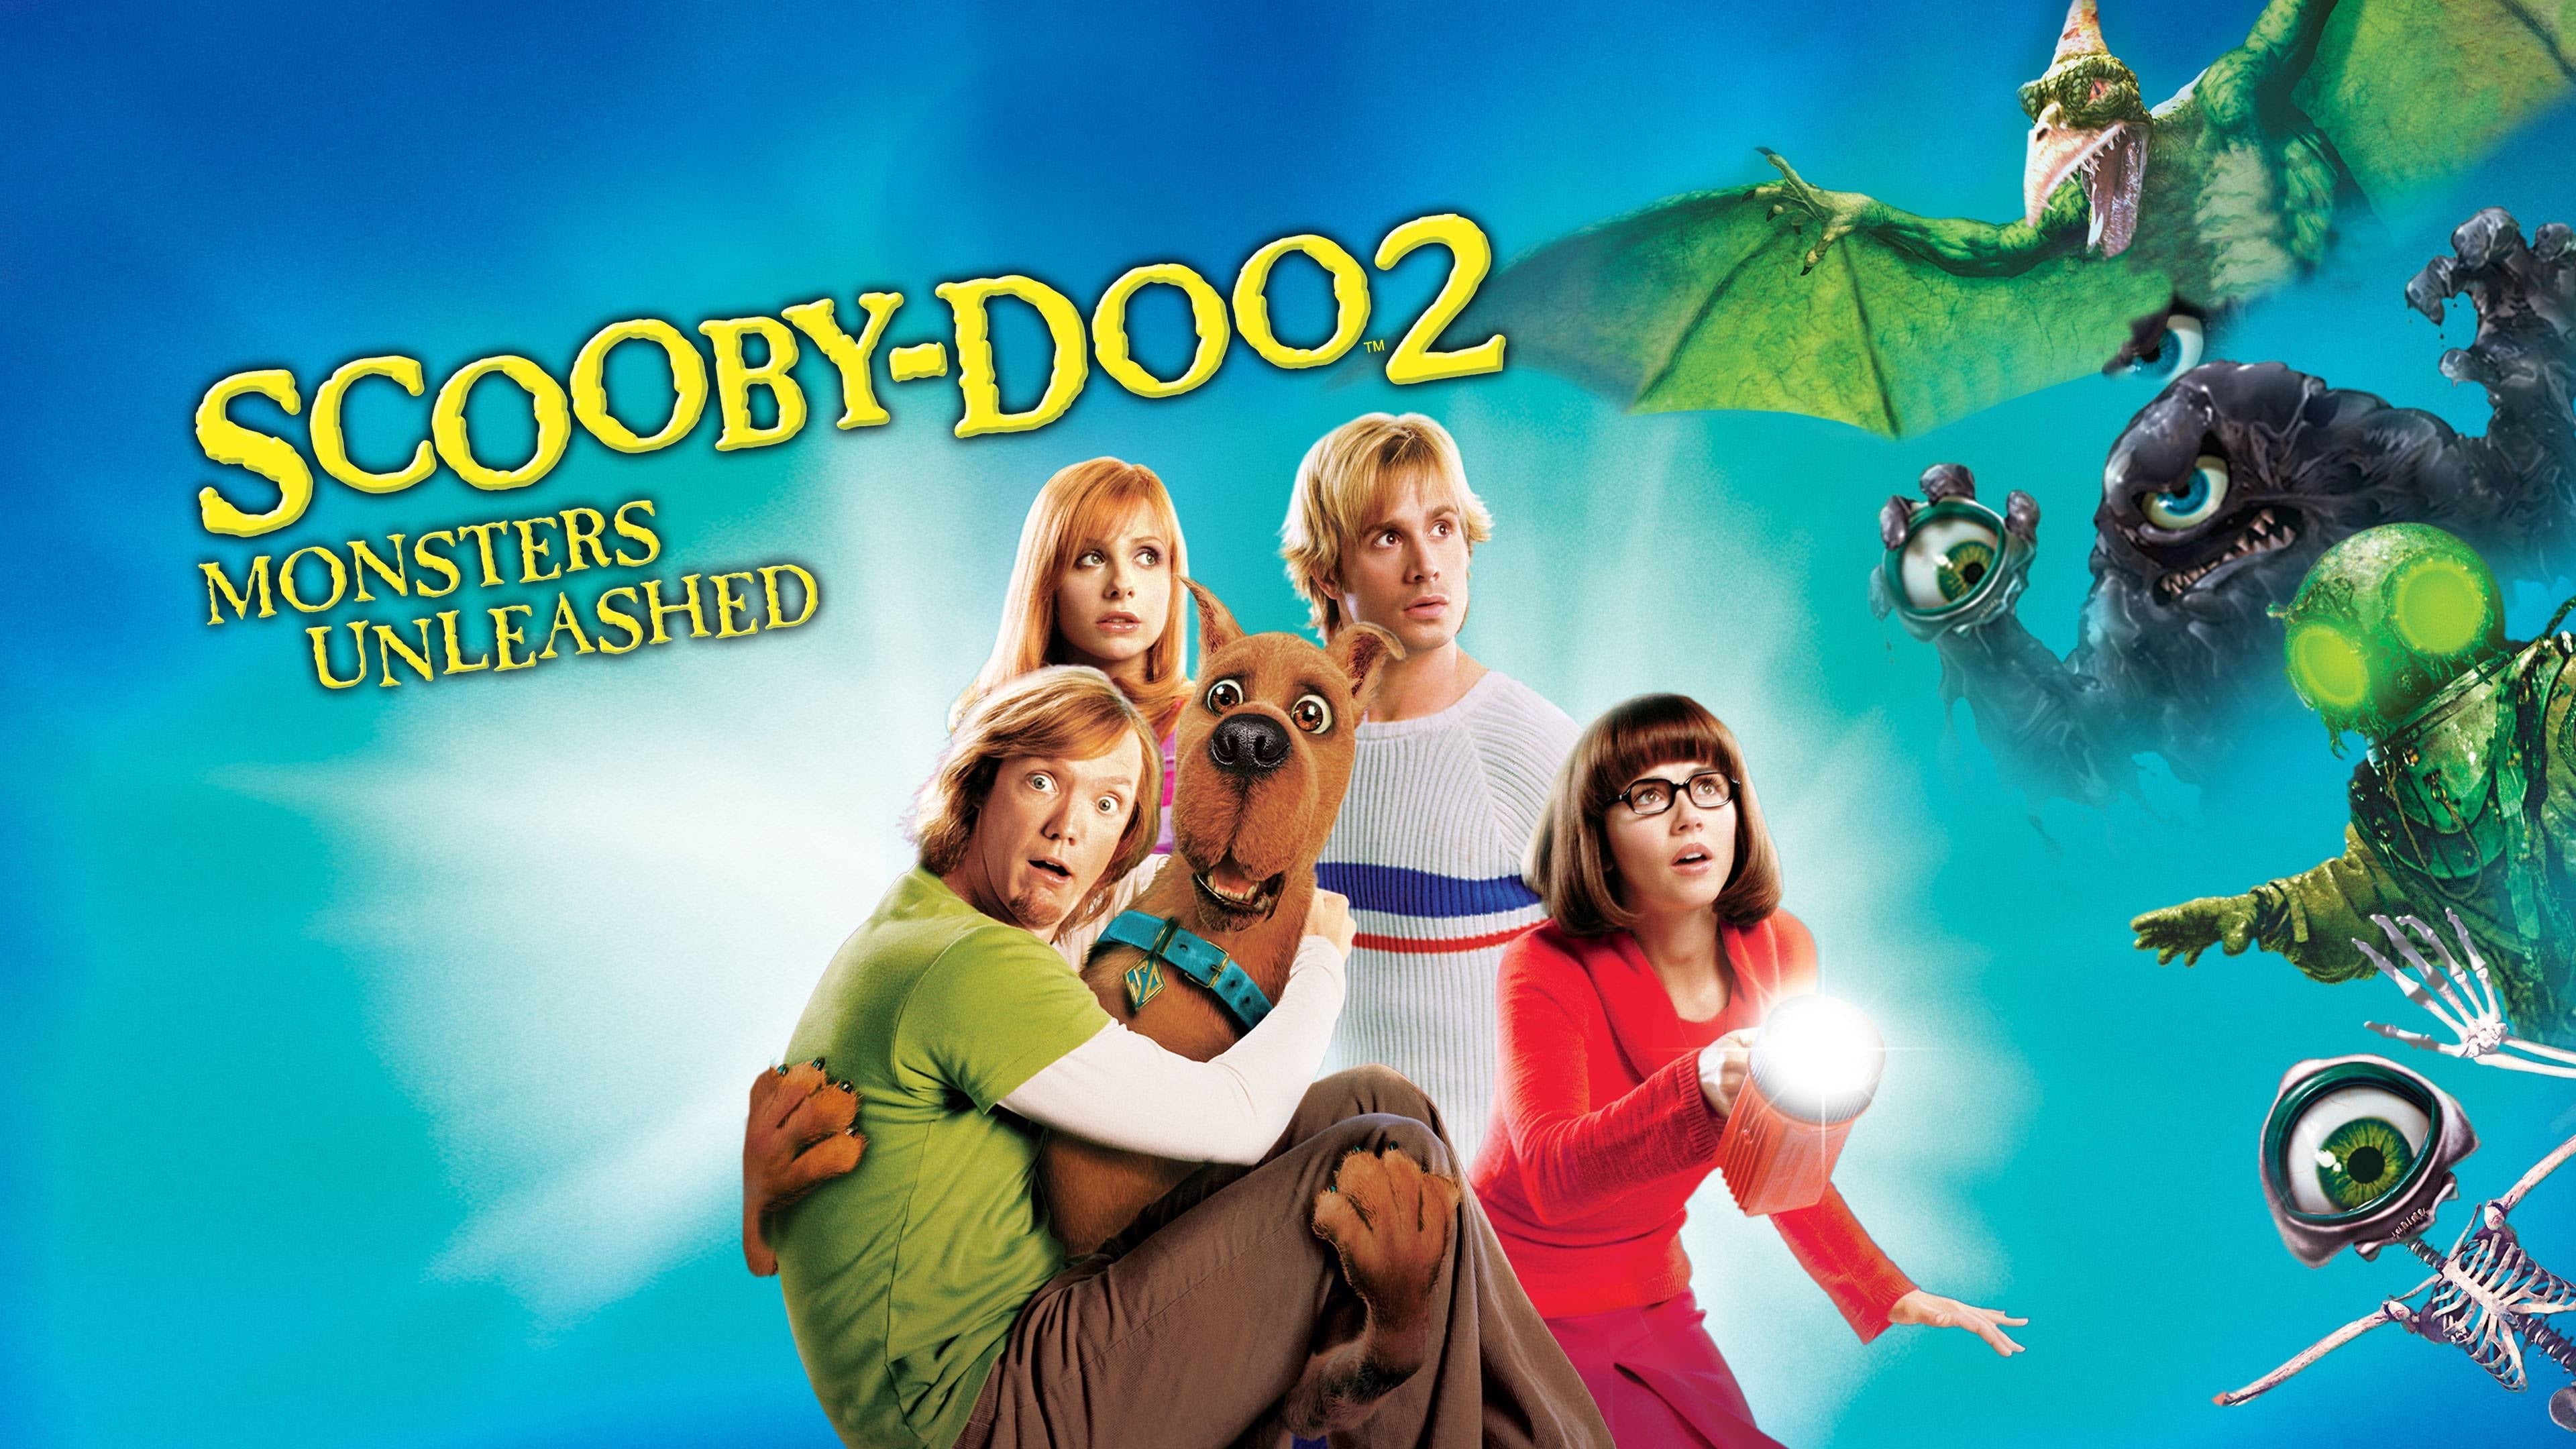 Movie Scooby-Doo 2: Monsters Unleashed HD Wallpaper | Background Image